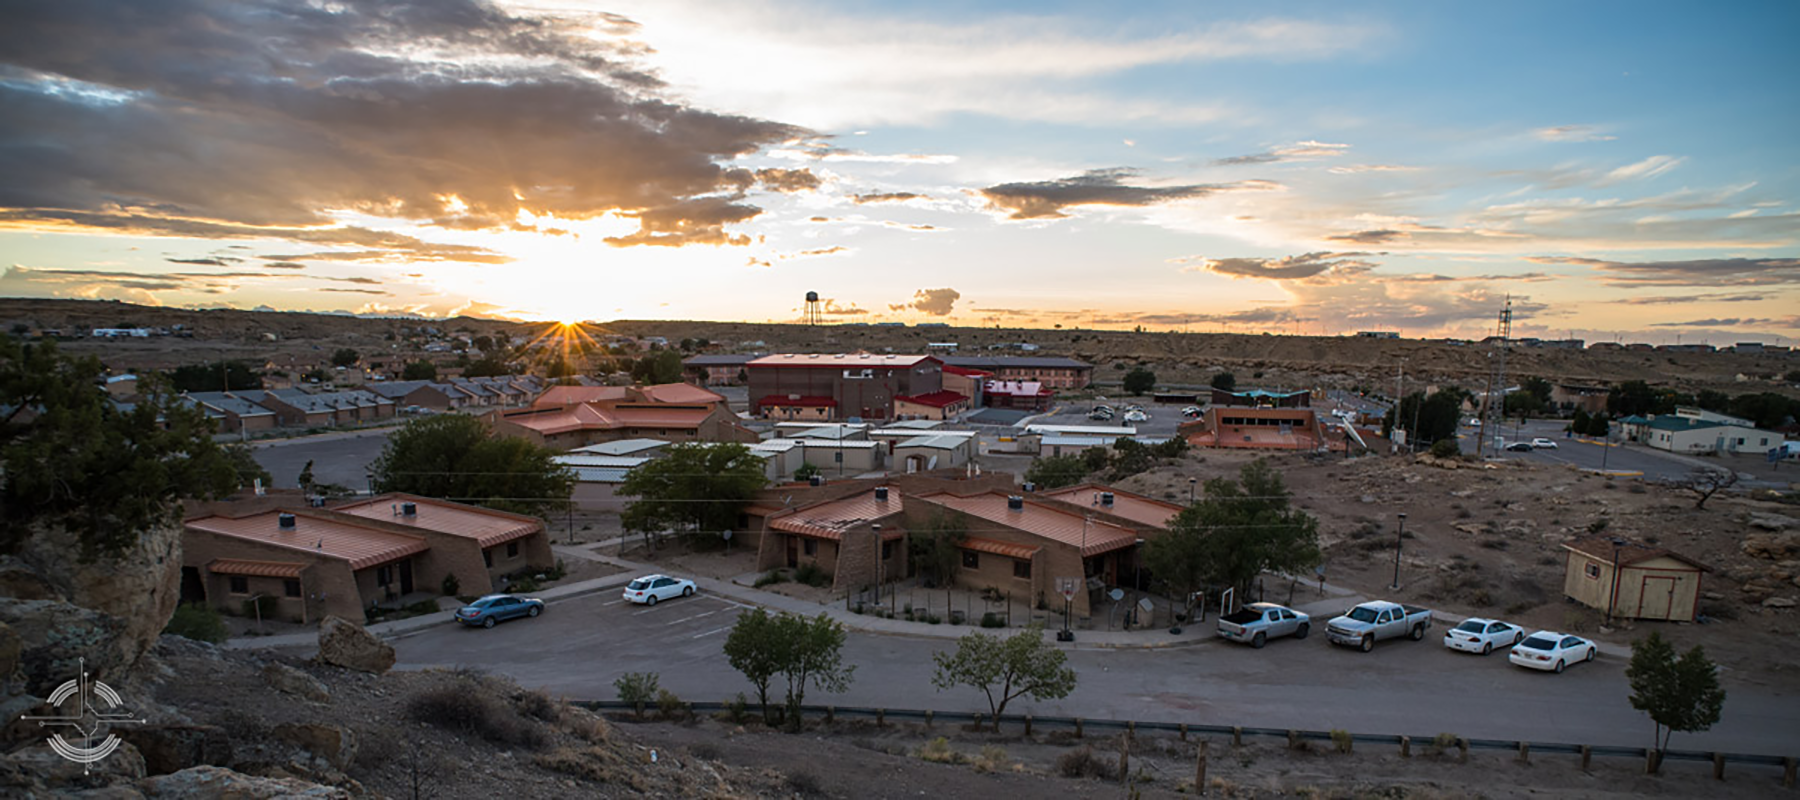 Navajo Technical University creating engineering and manufacturing opportunities on Navajo Nation | Navajo-Hopi Observer